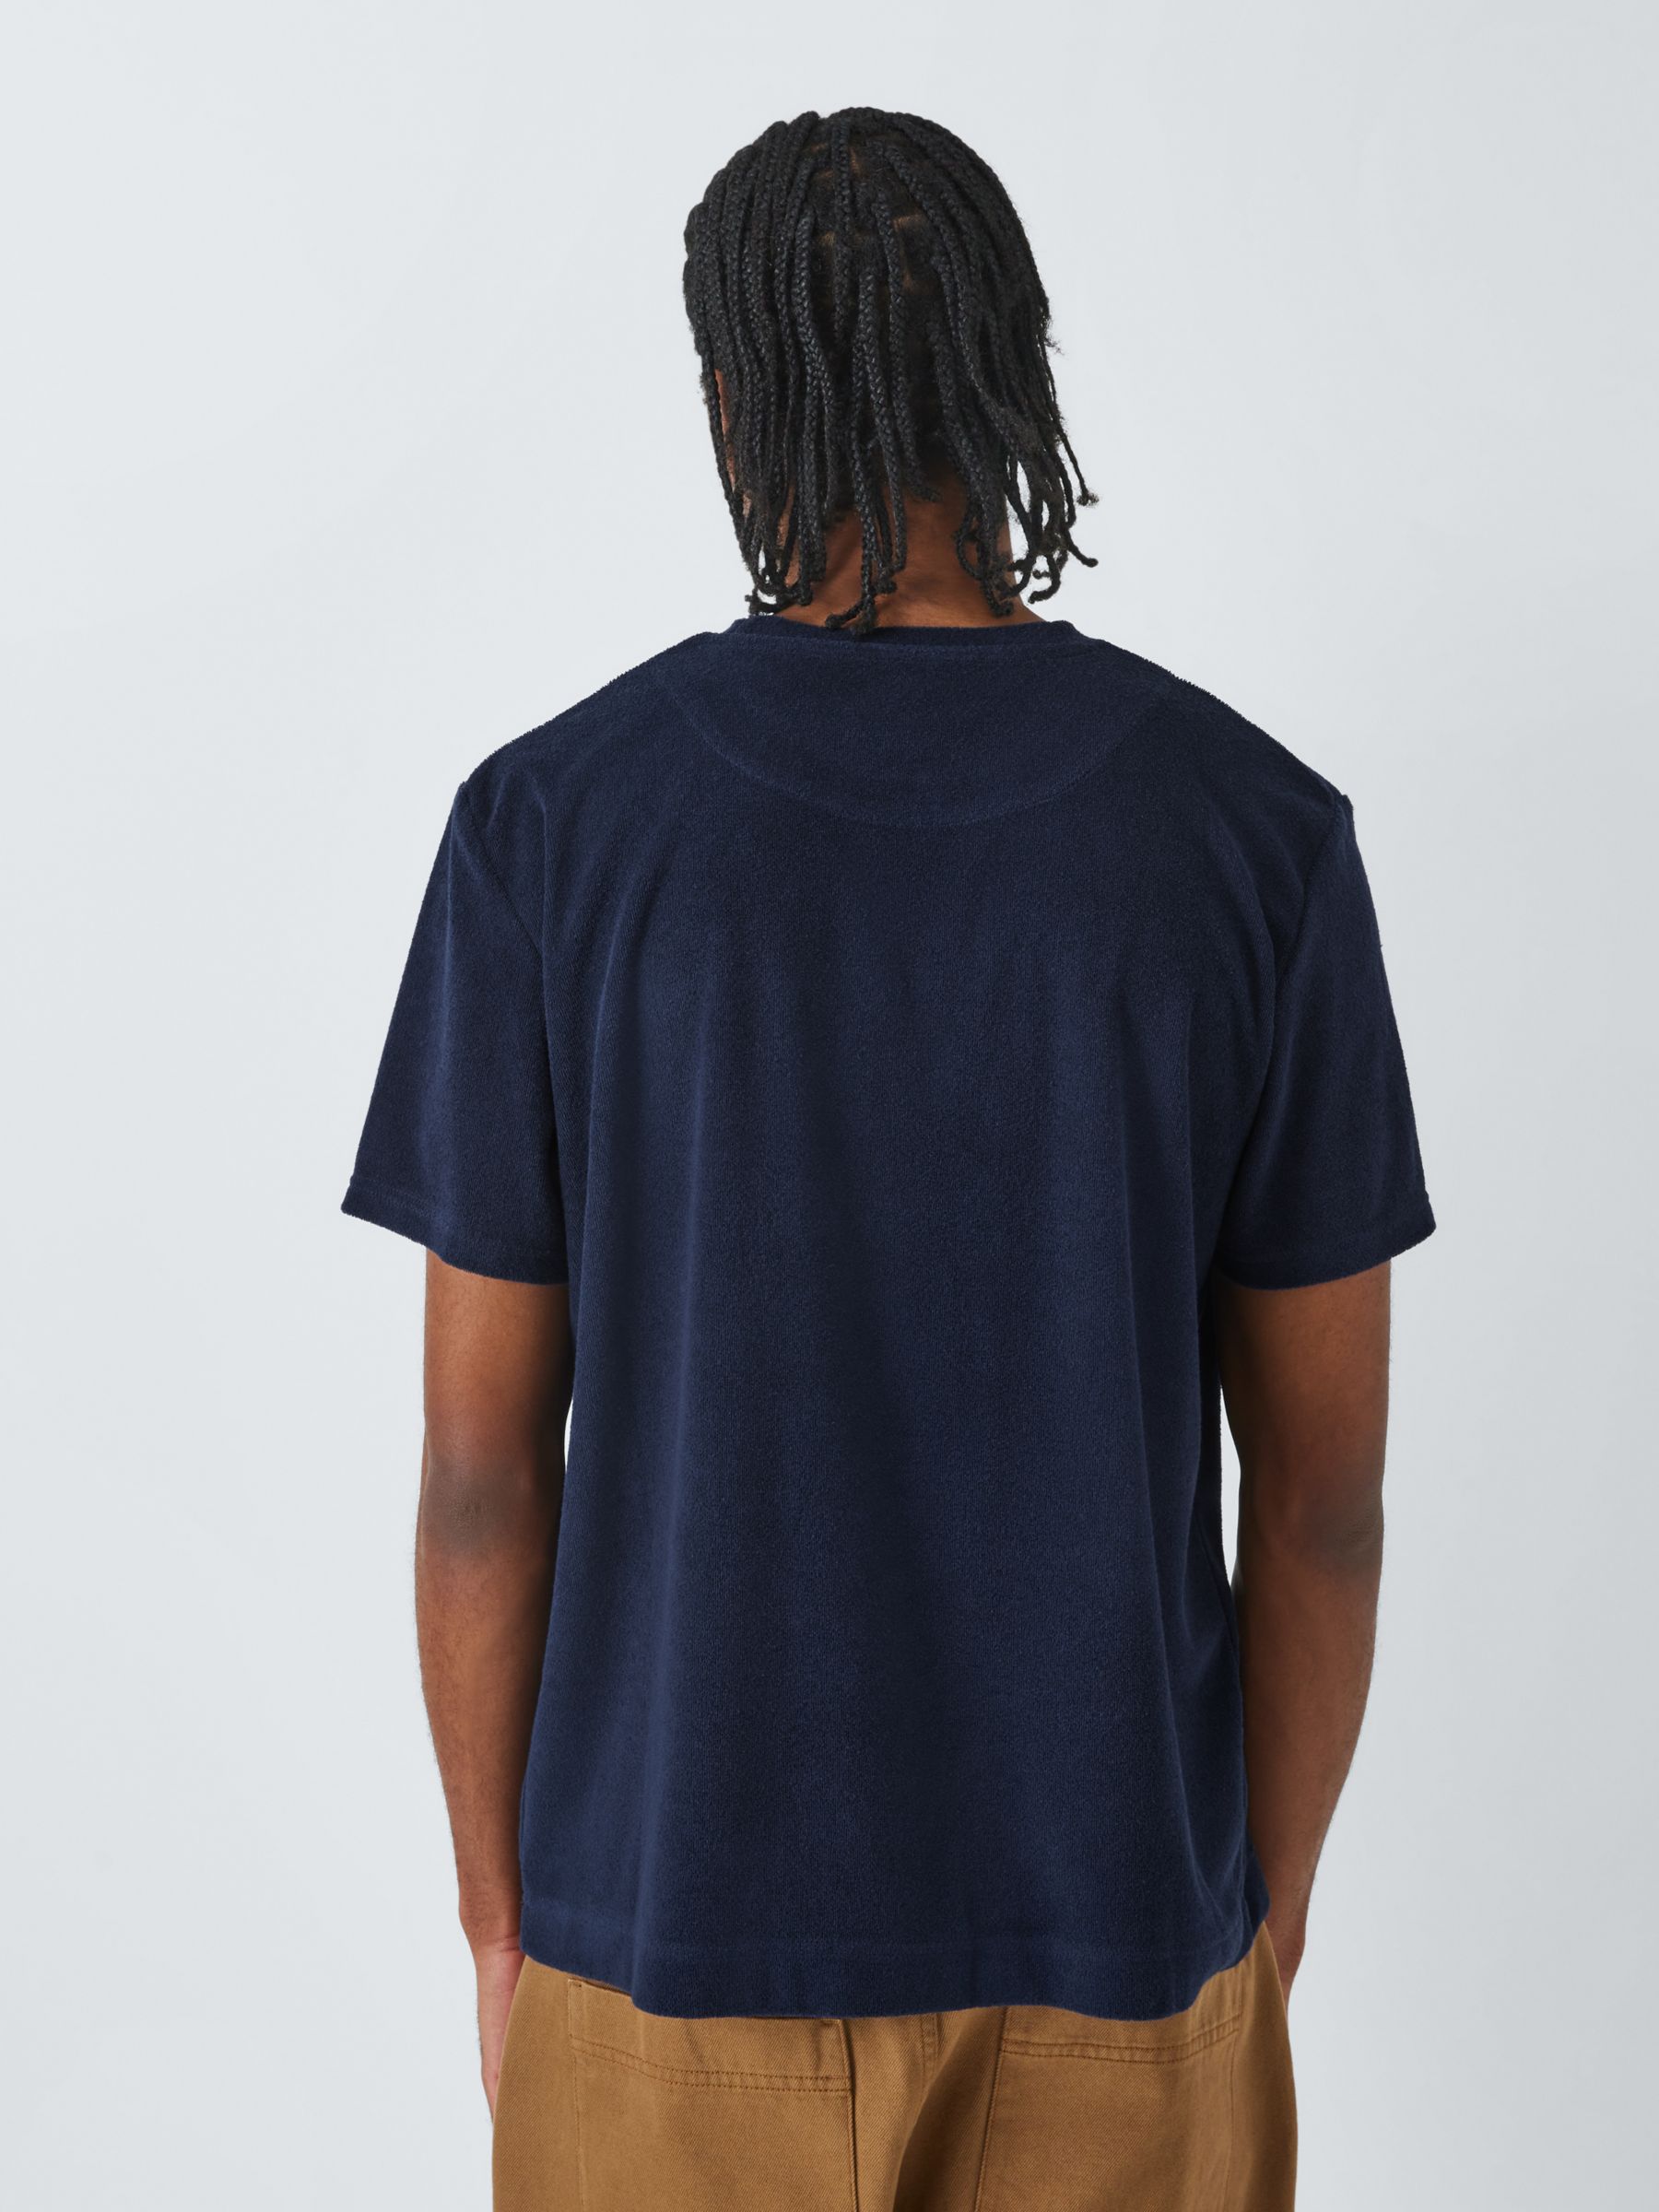 John Lewis ANYDAY Towelling T-Shirt, Navy, M